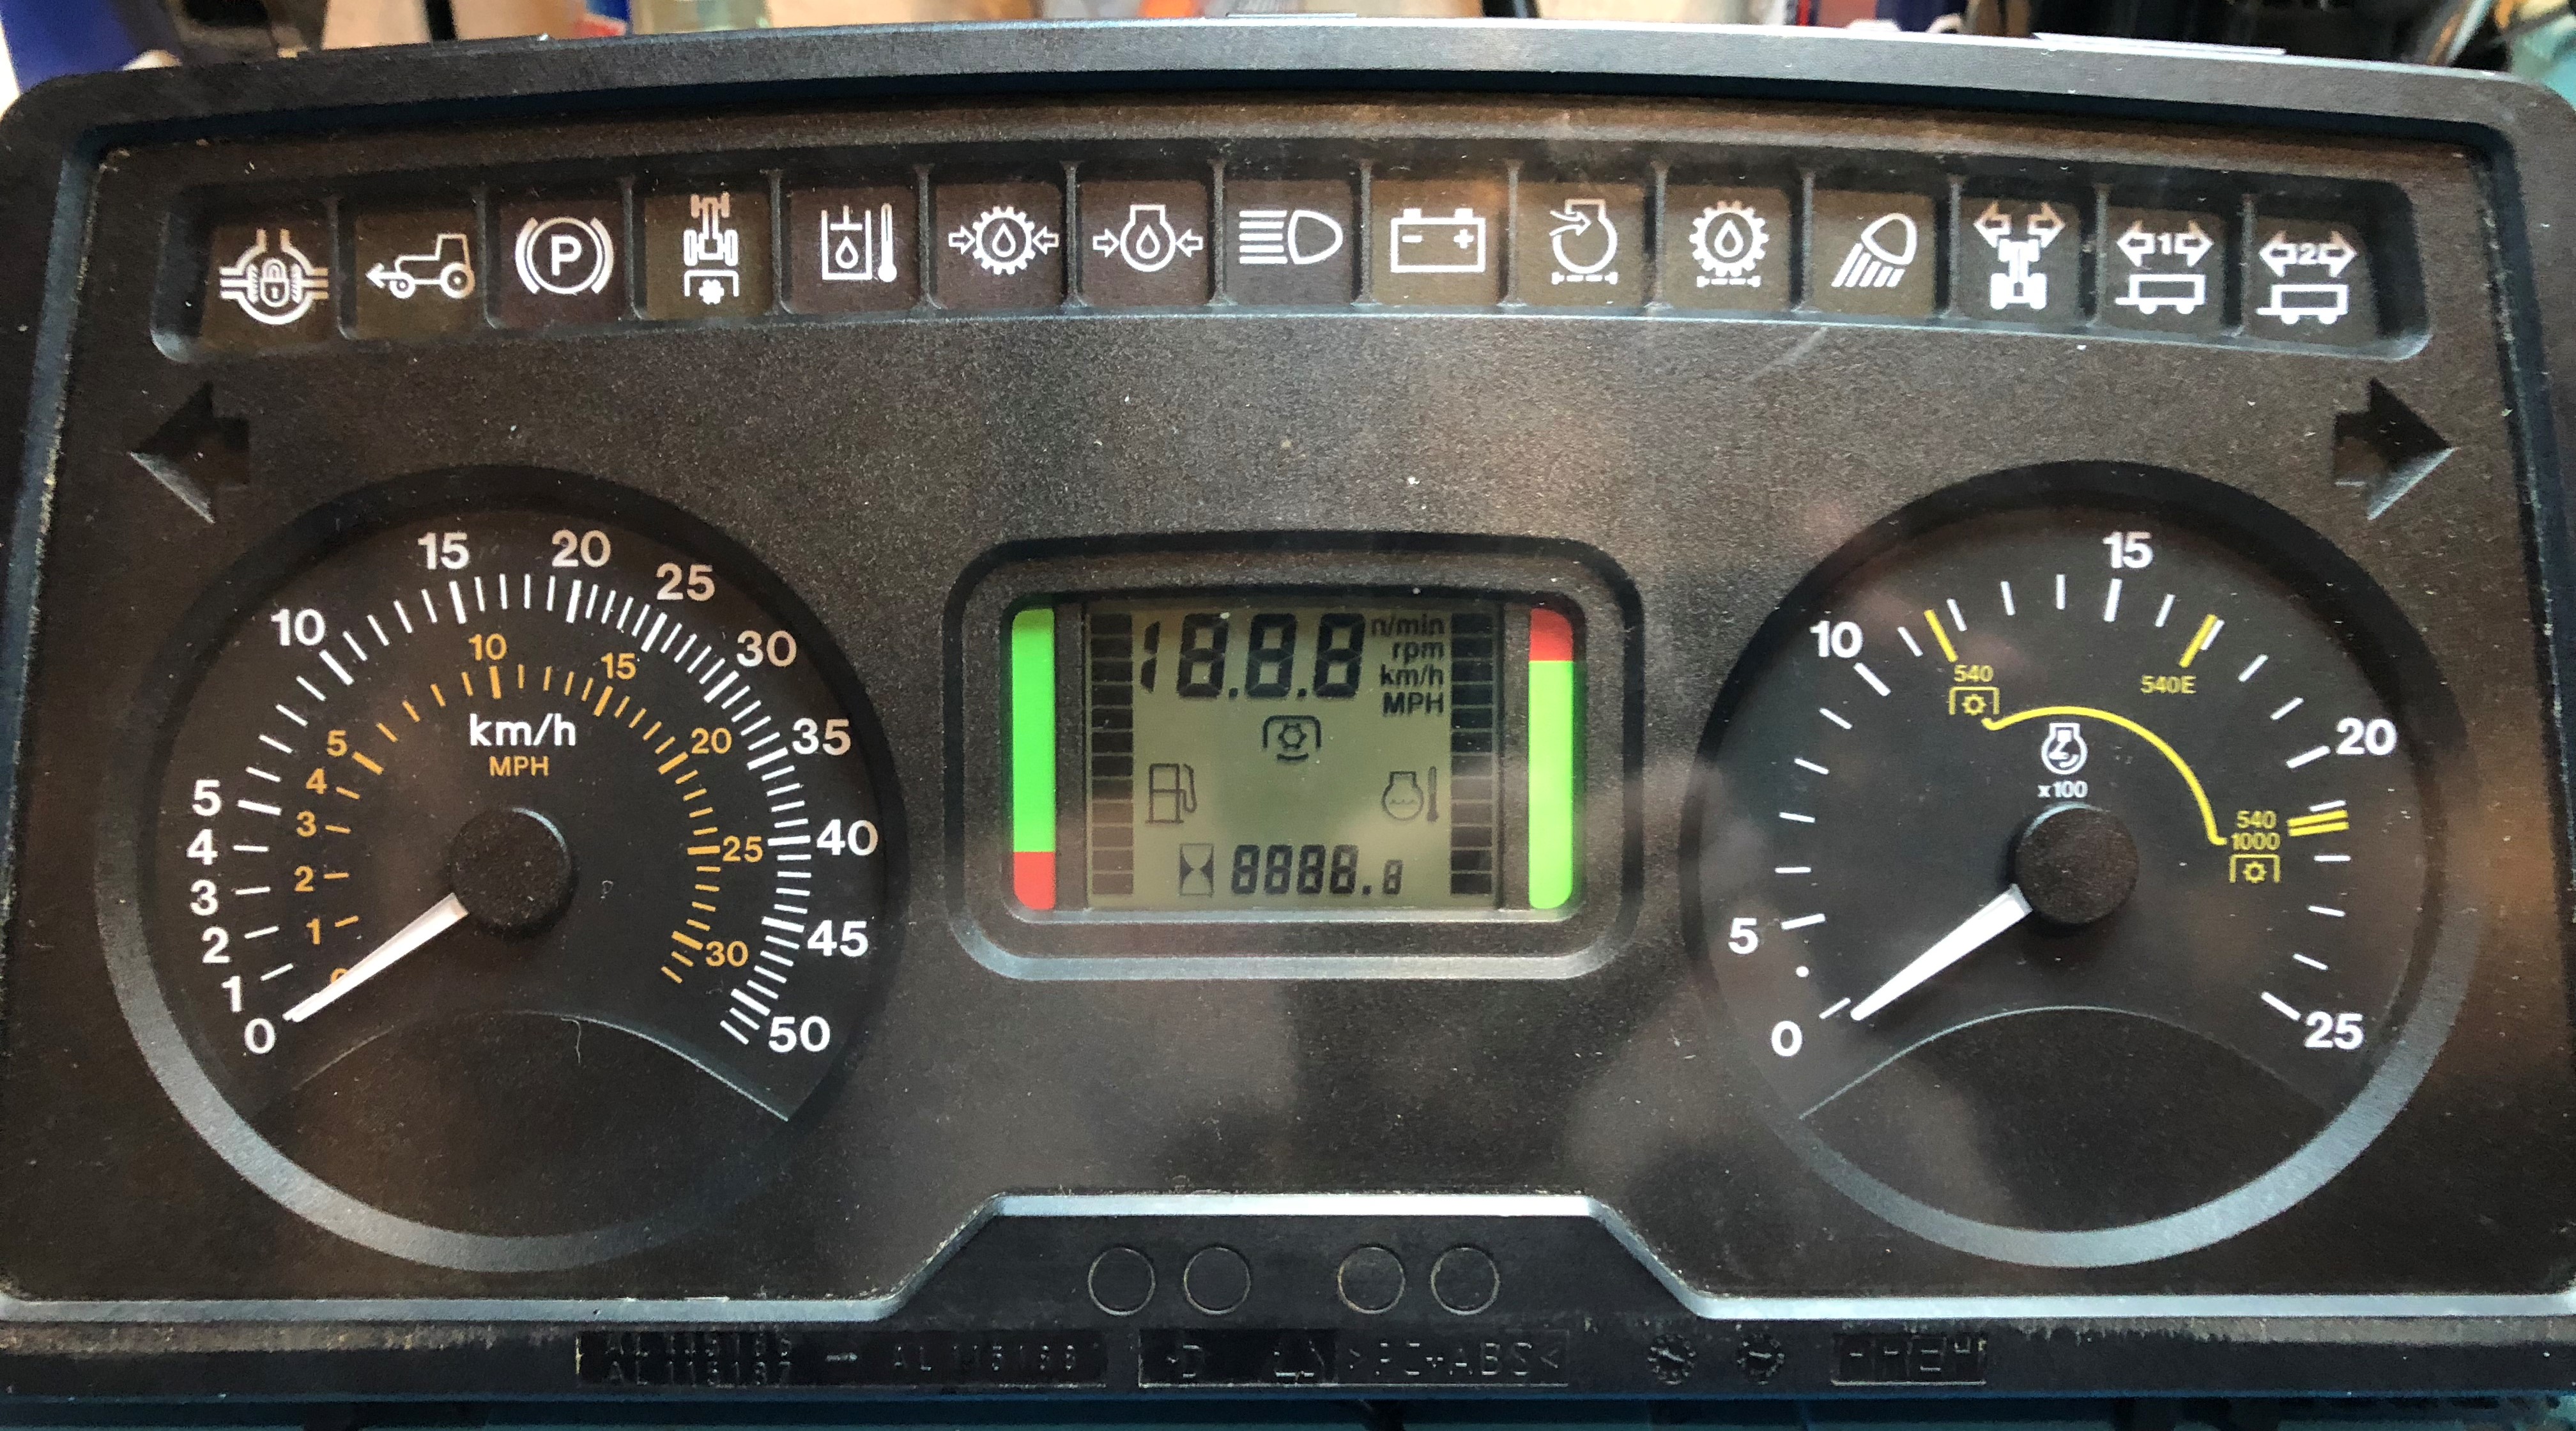 2008 john deere tractor used dashboard instrument cluster for sale (km/h) -...